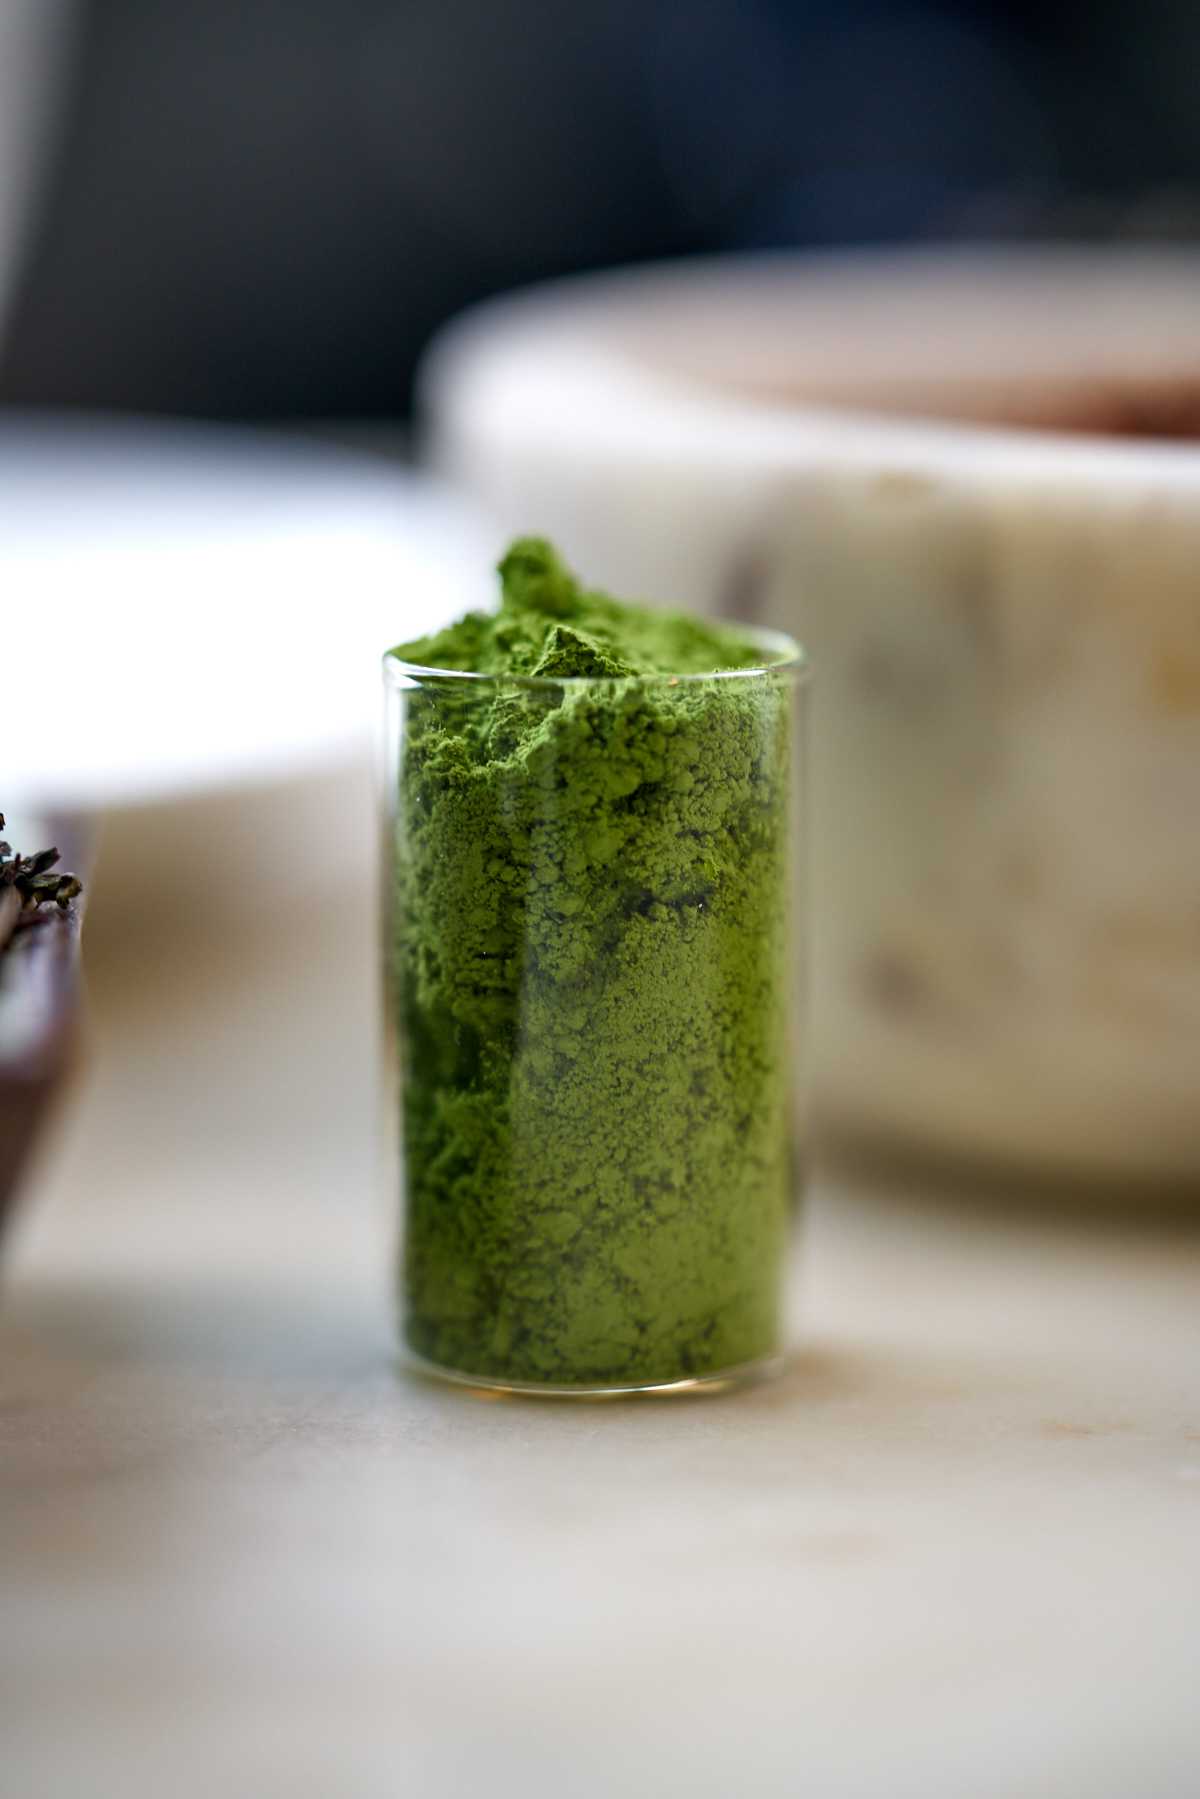 Powdered green tea in a glass vial.